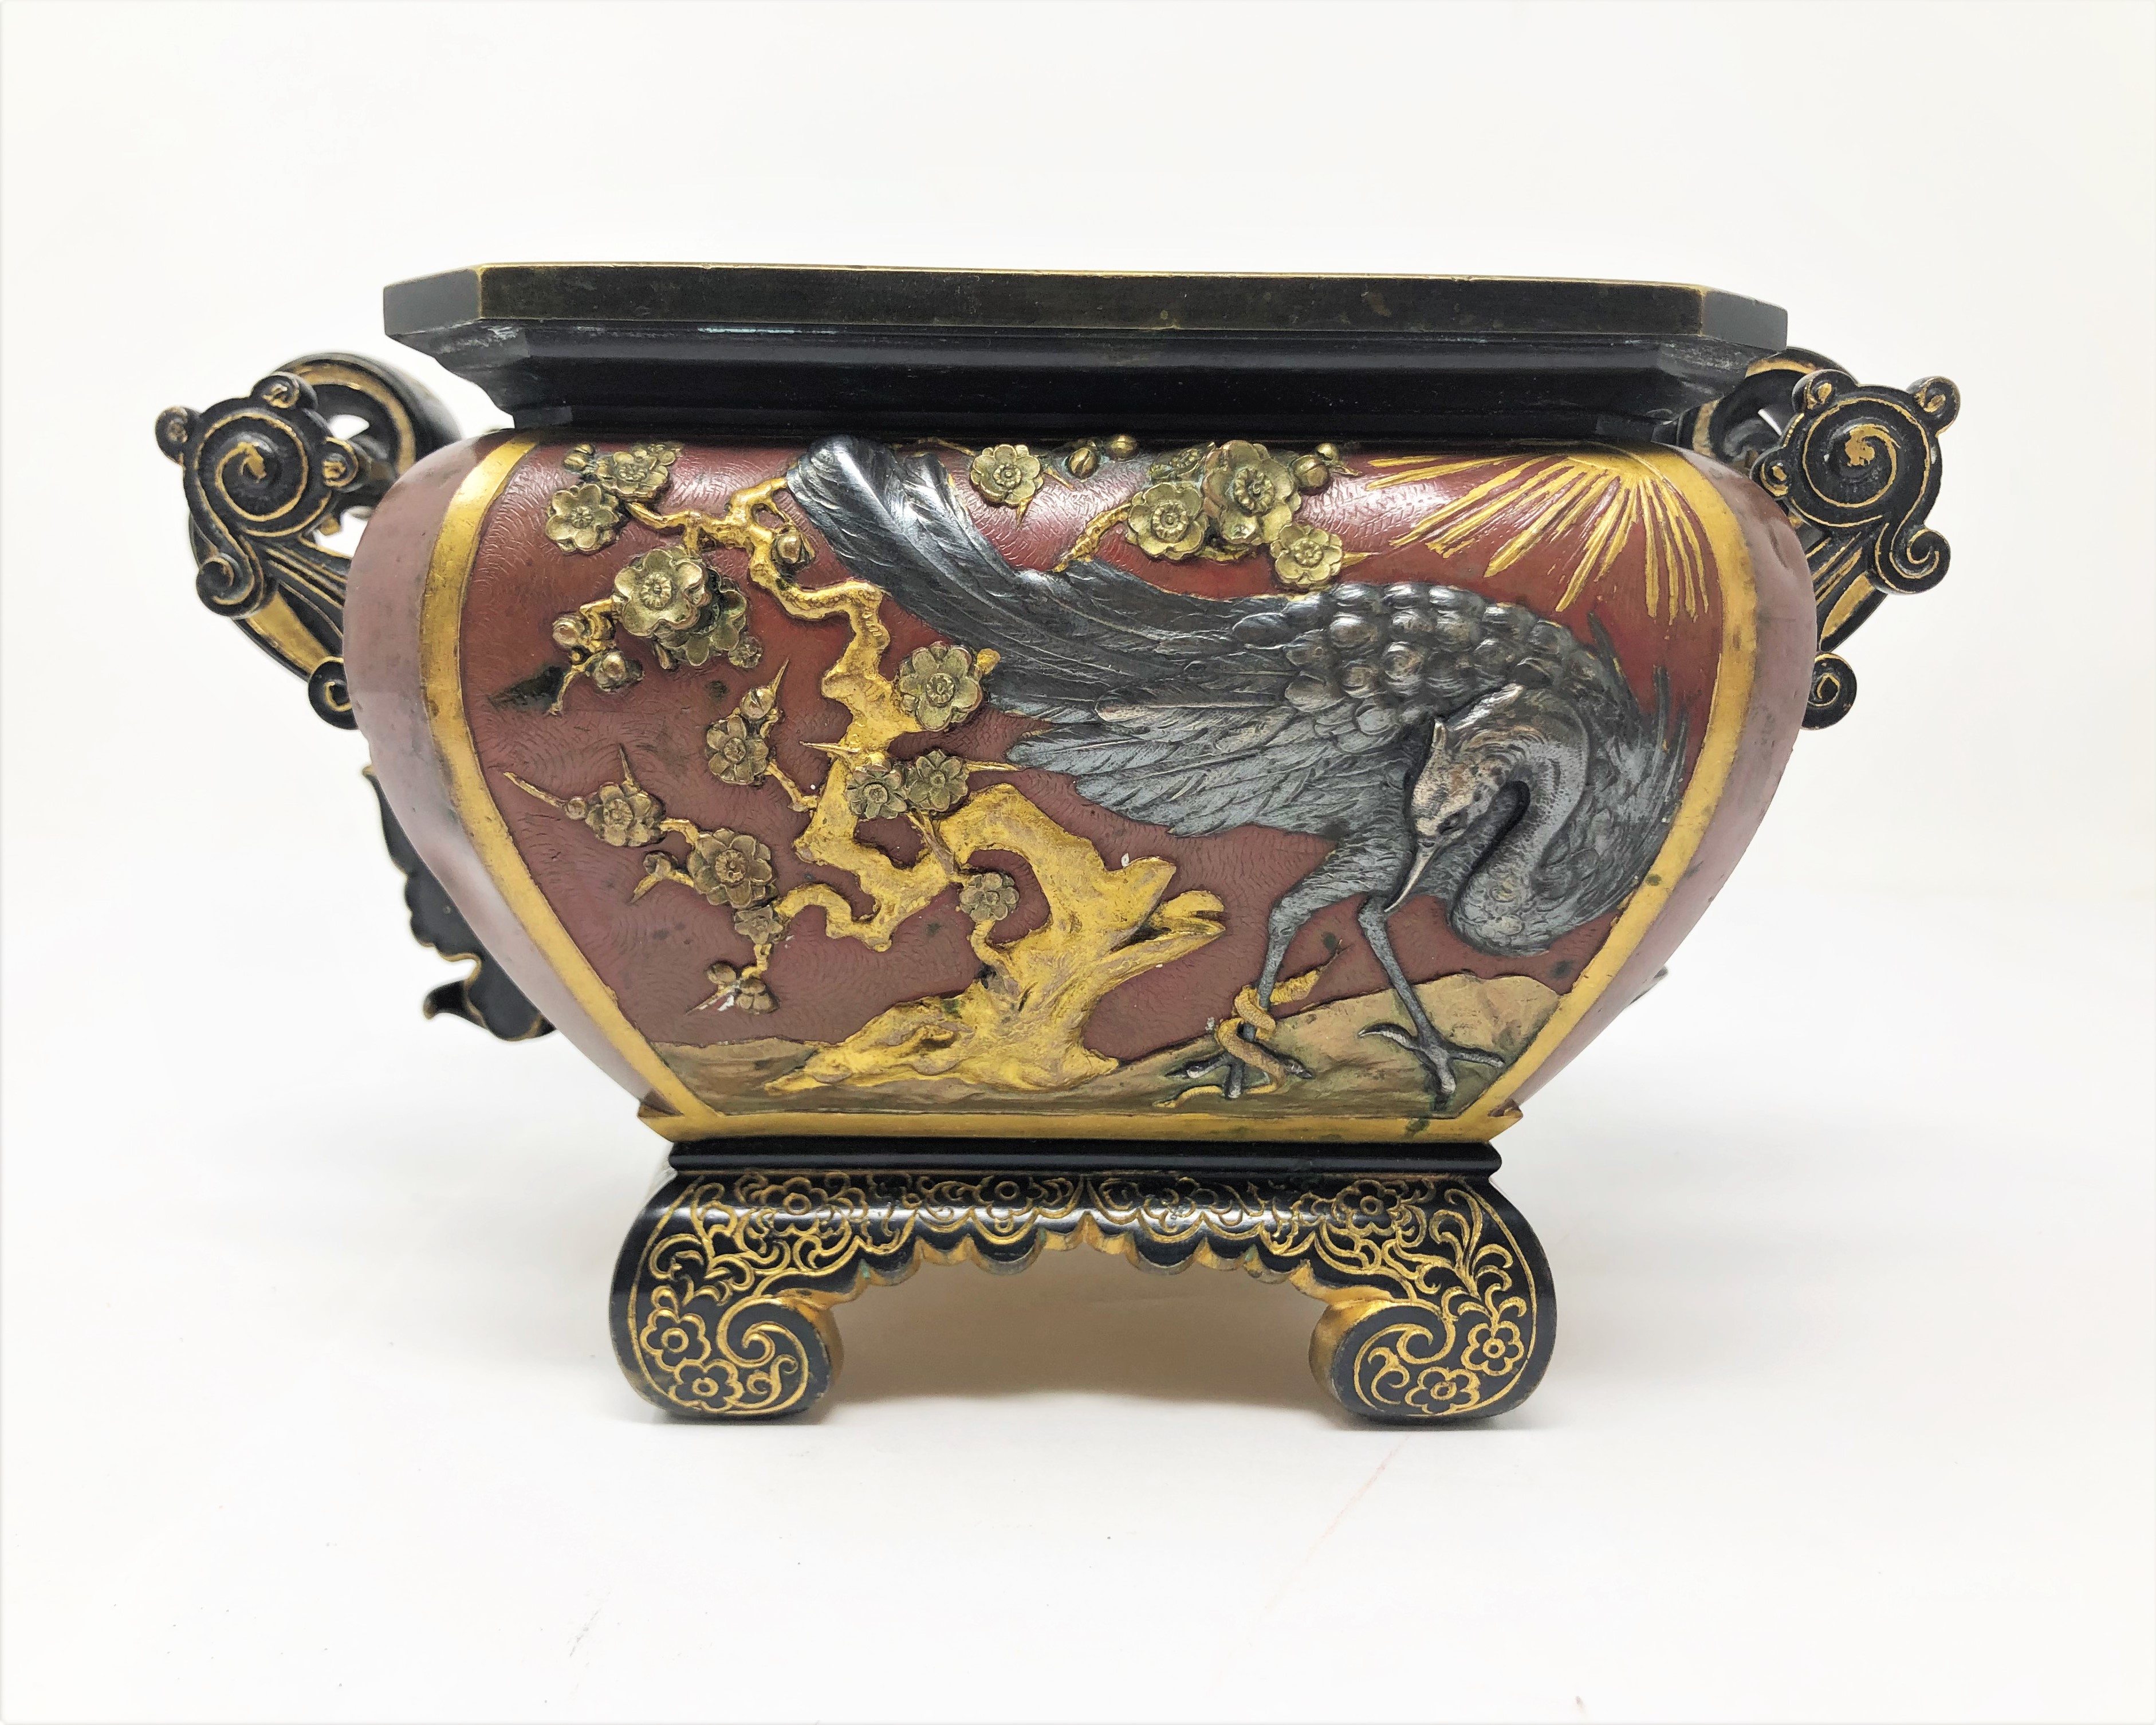 A JAPANESE MIXED METAL PARCEL-GILT KORO, MEIJI PERIOD (1868-1912) - Image 2 of 8